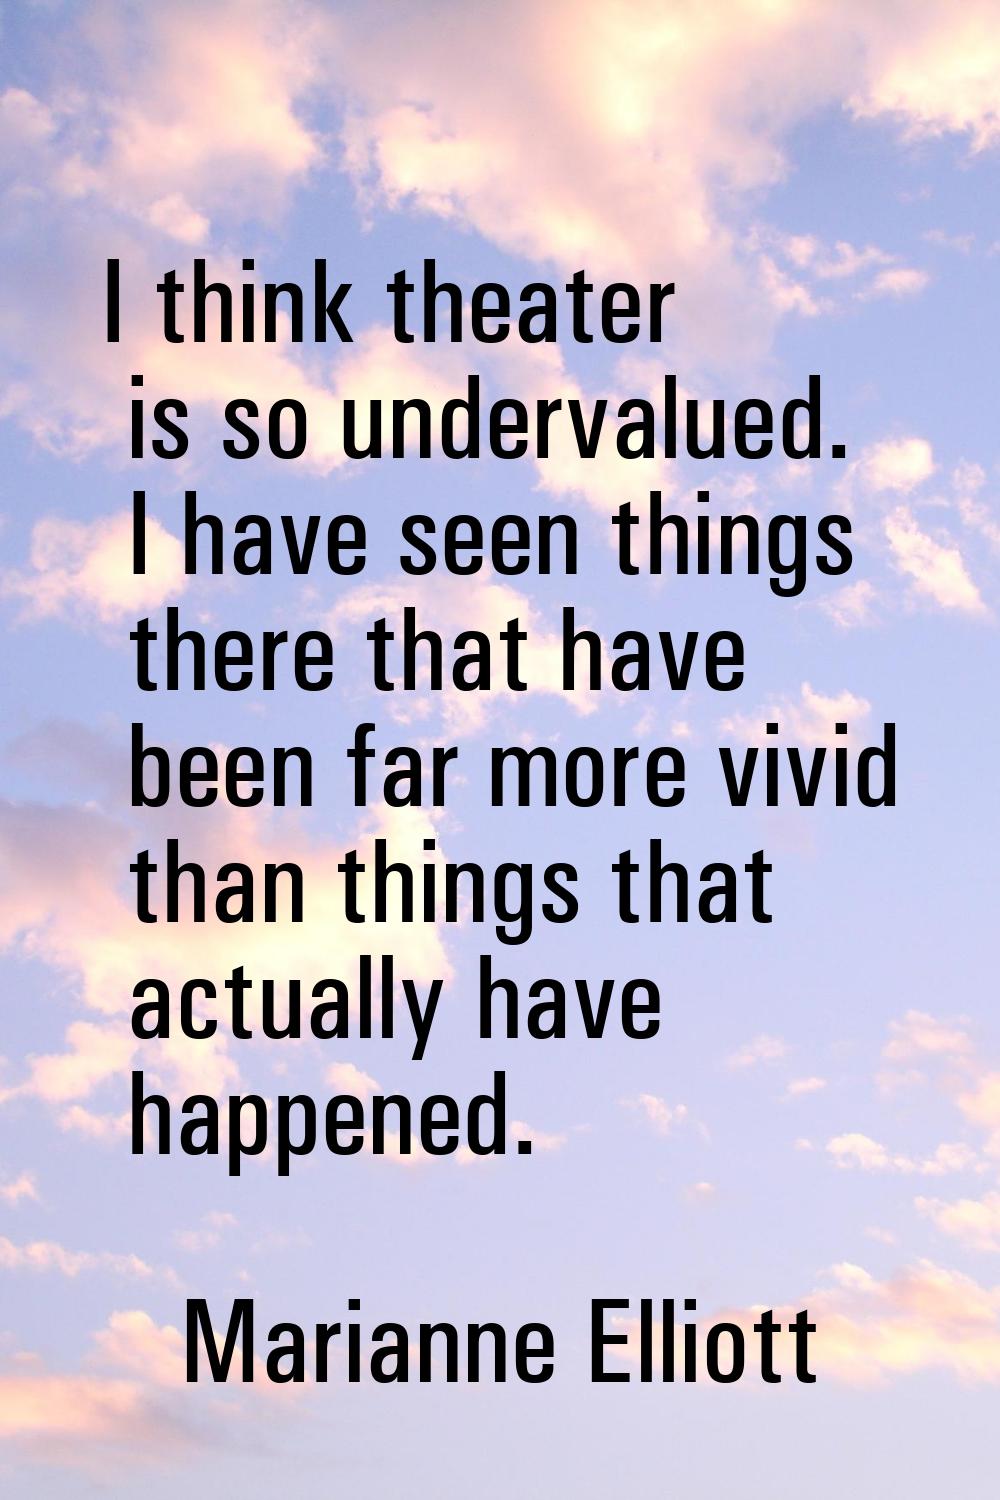 I think theater is so undervalued. I have seen things there that have been far more vivid than thin